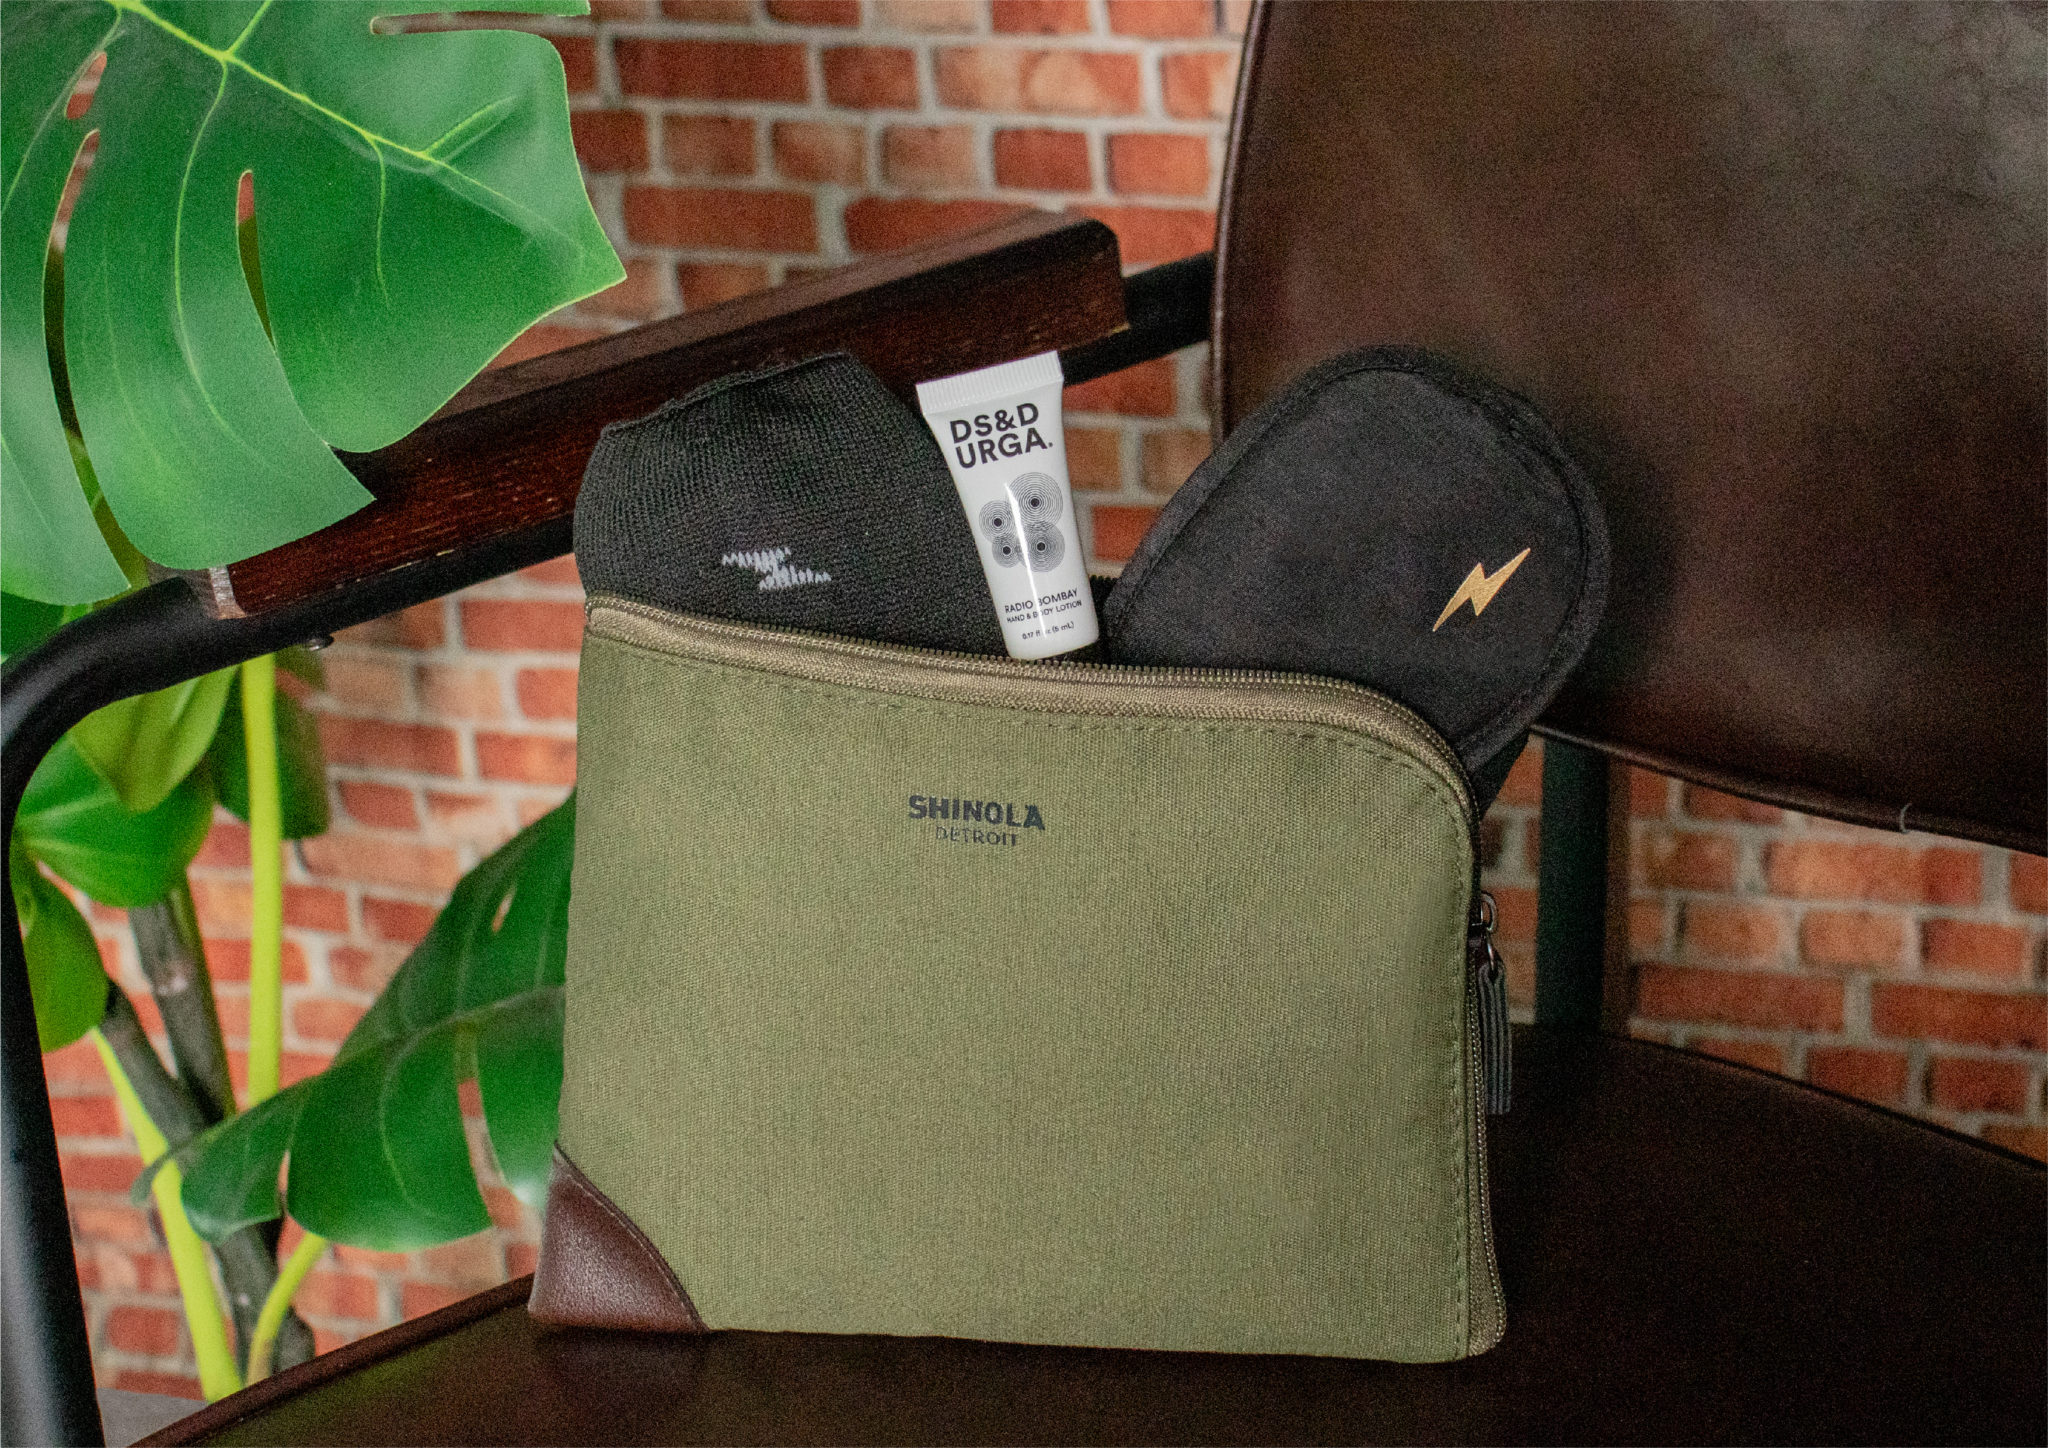 New Amenity Kits for American Airlines